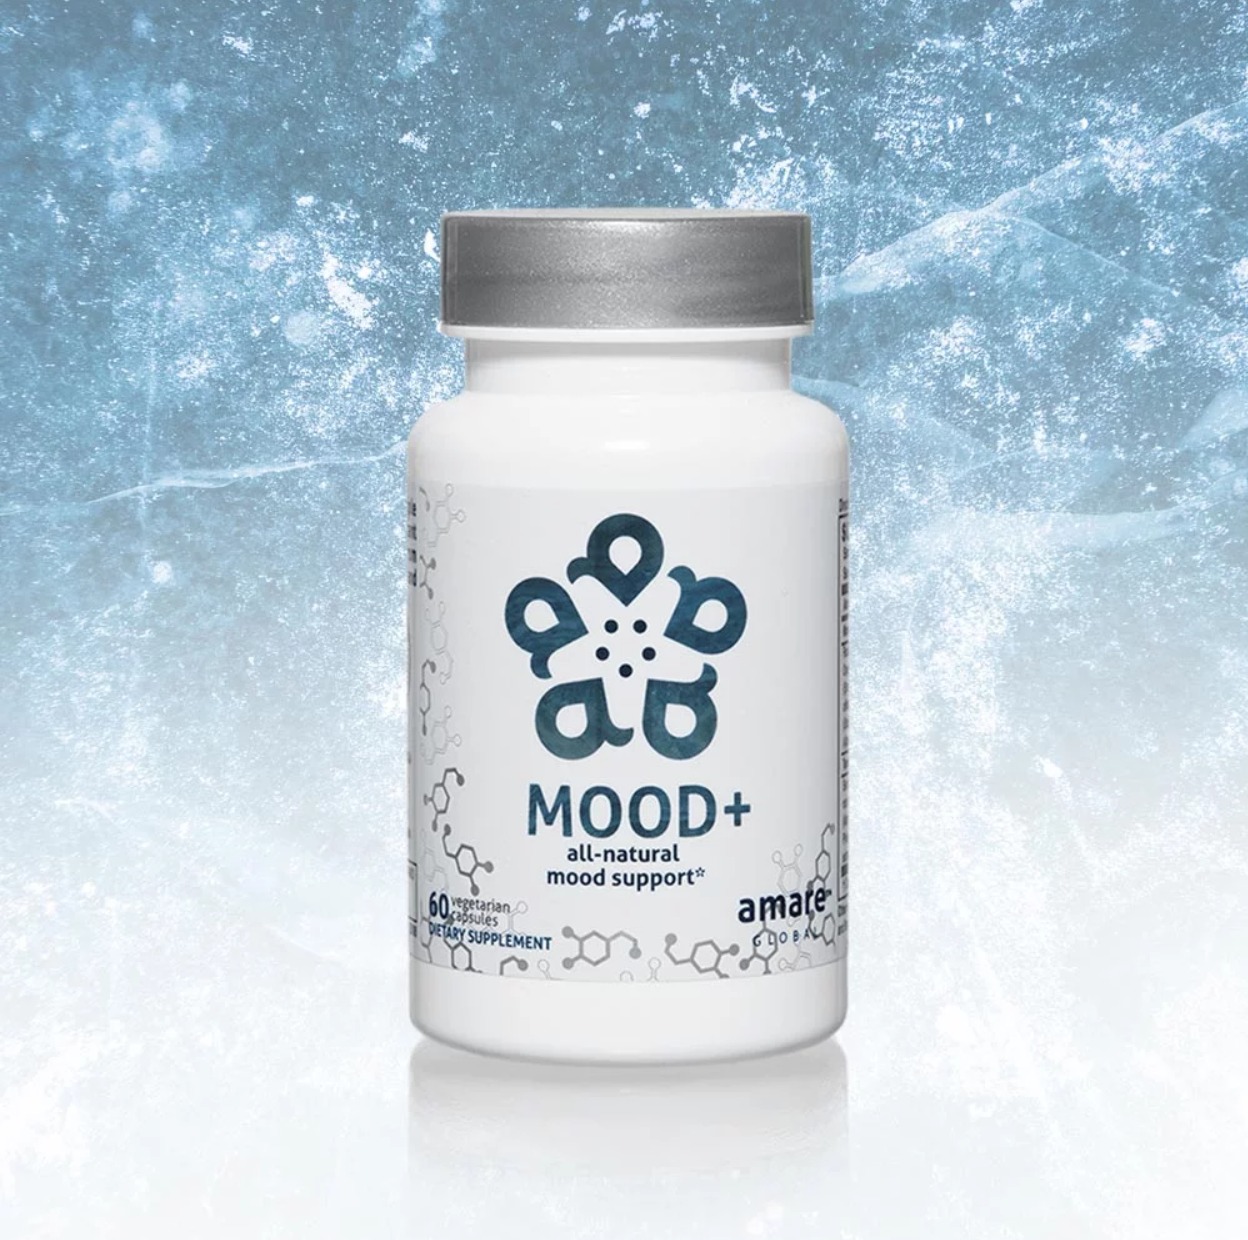 Amare Mood+ All Natural Mood Support Product